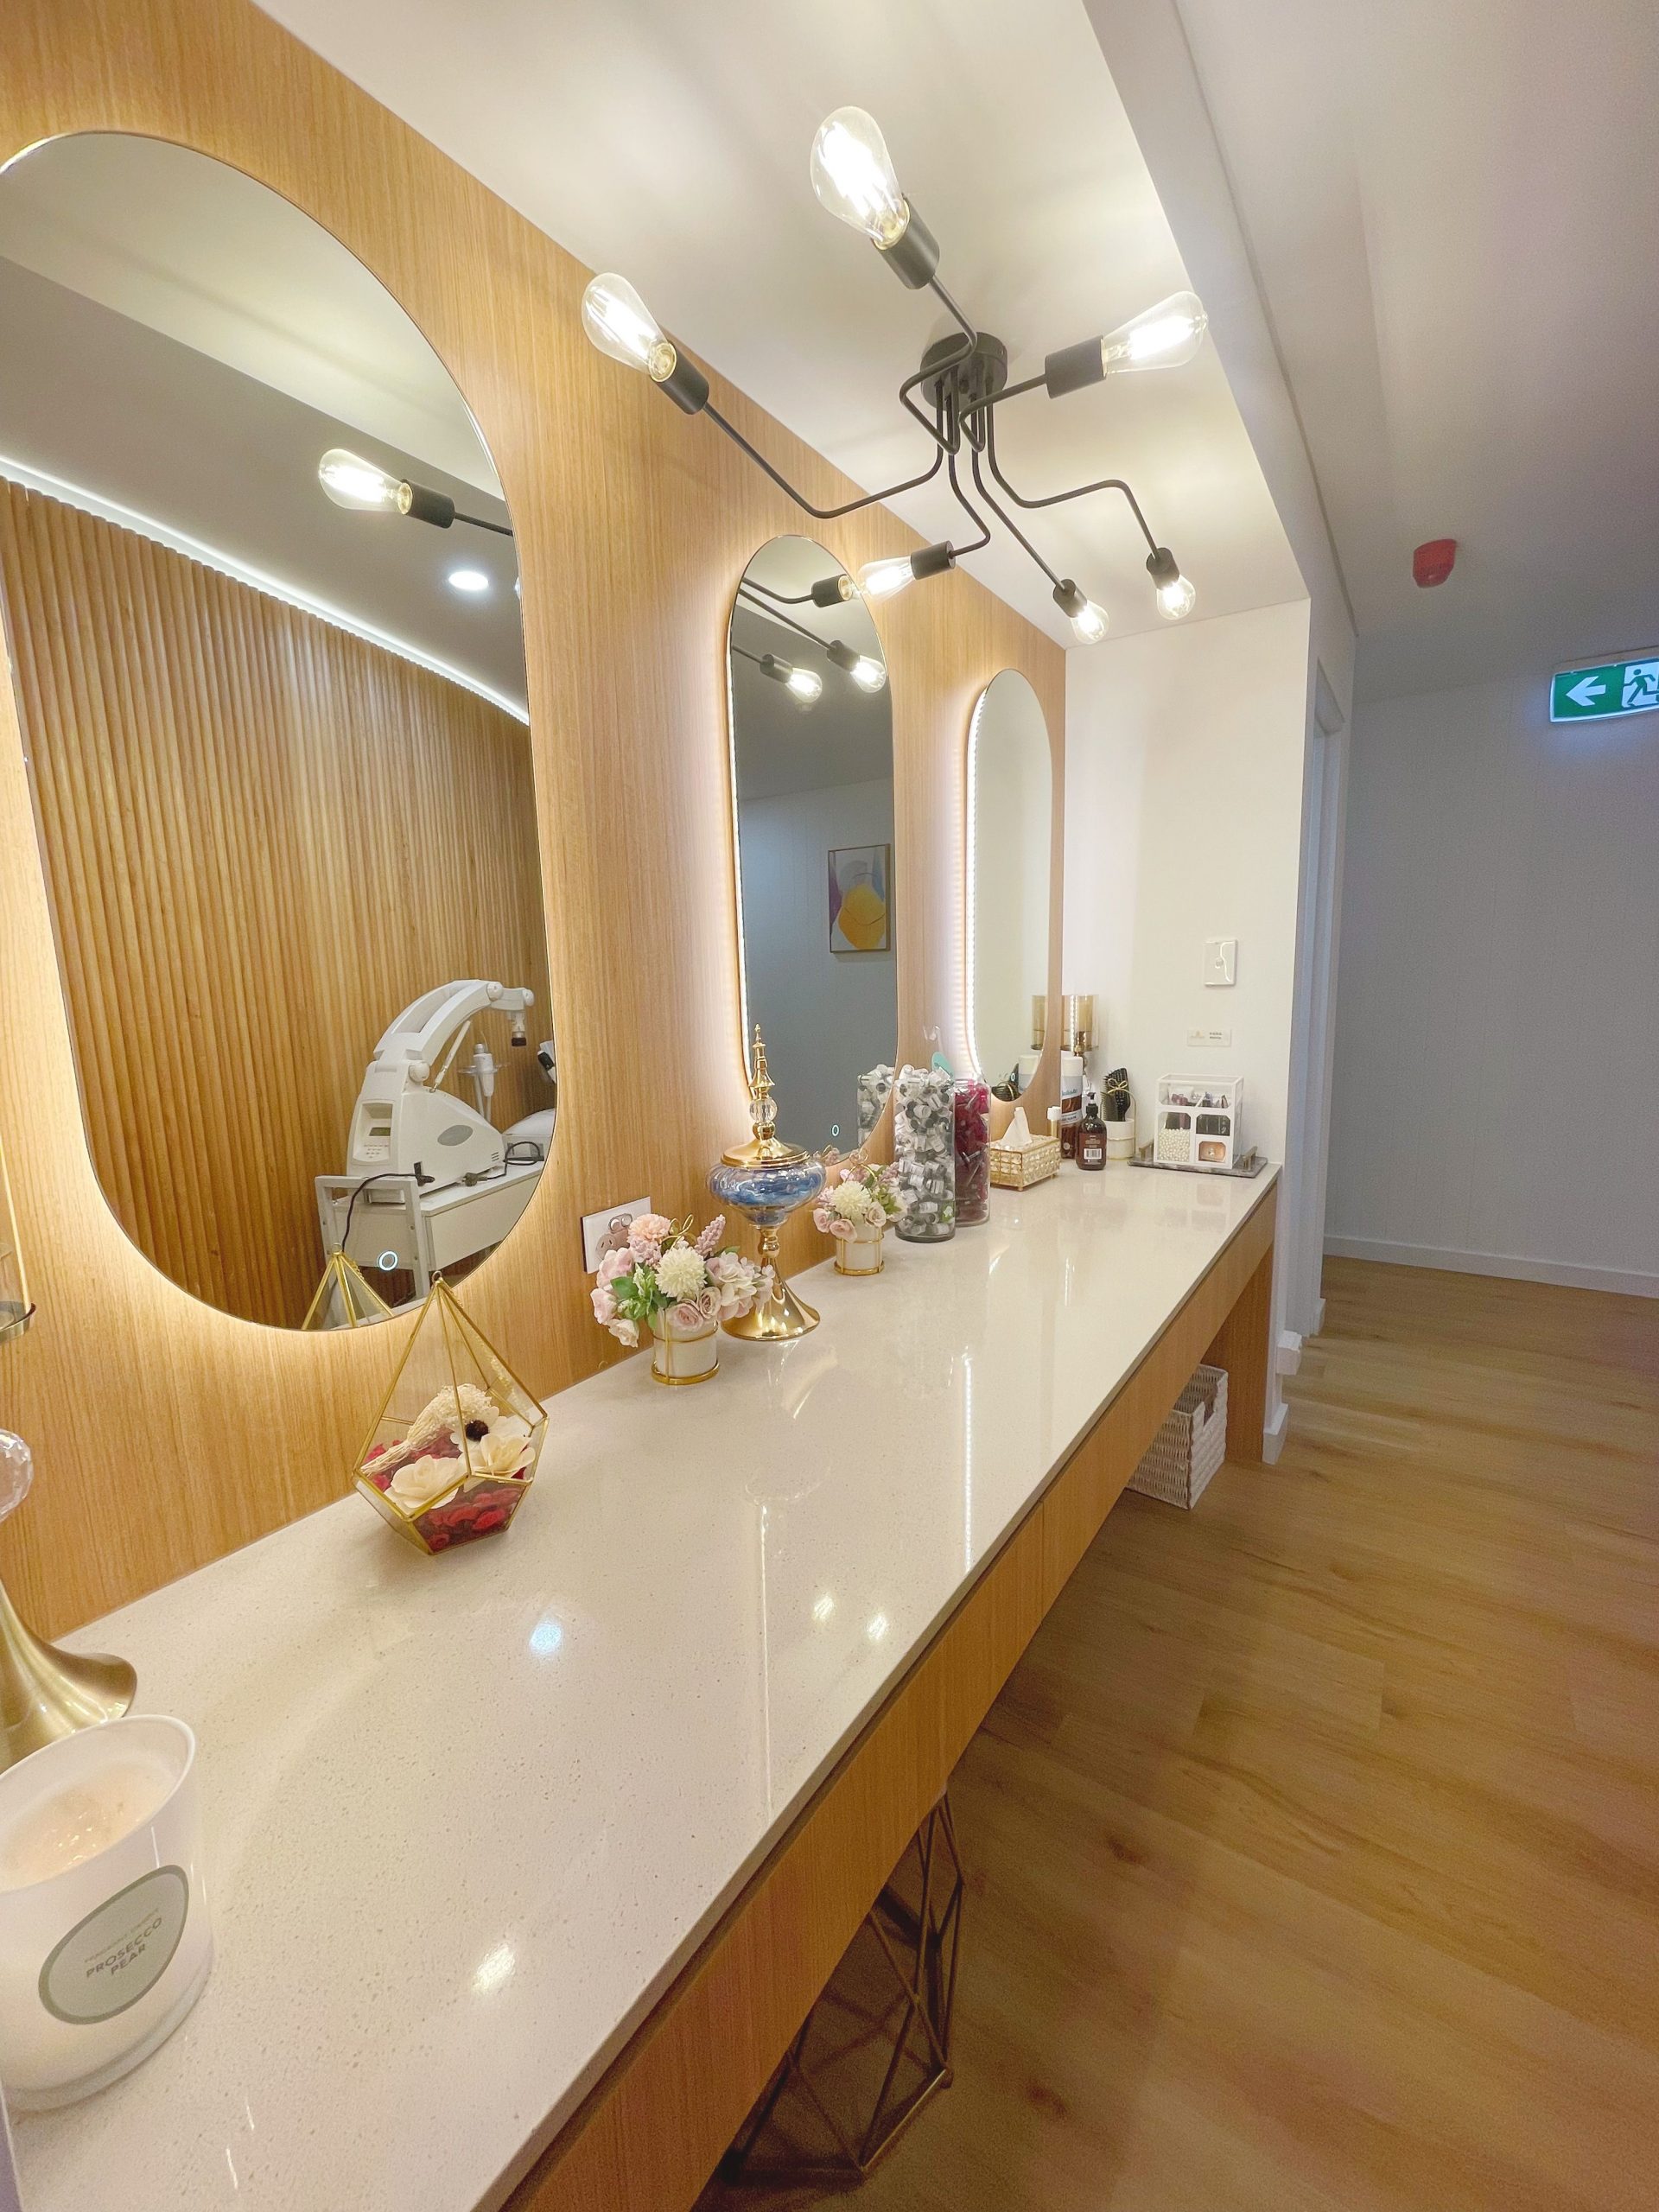 WIN A Deluxe Facial Treatment for you and your bestie At Babyskin Laser & Cosmetic Clinic!